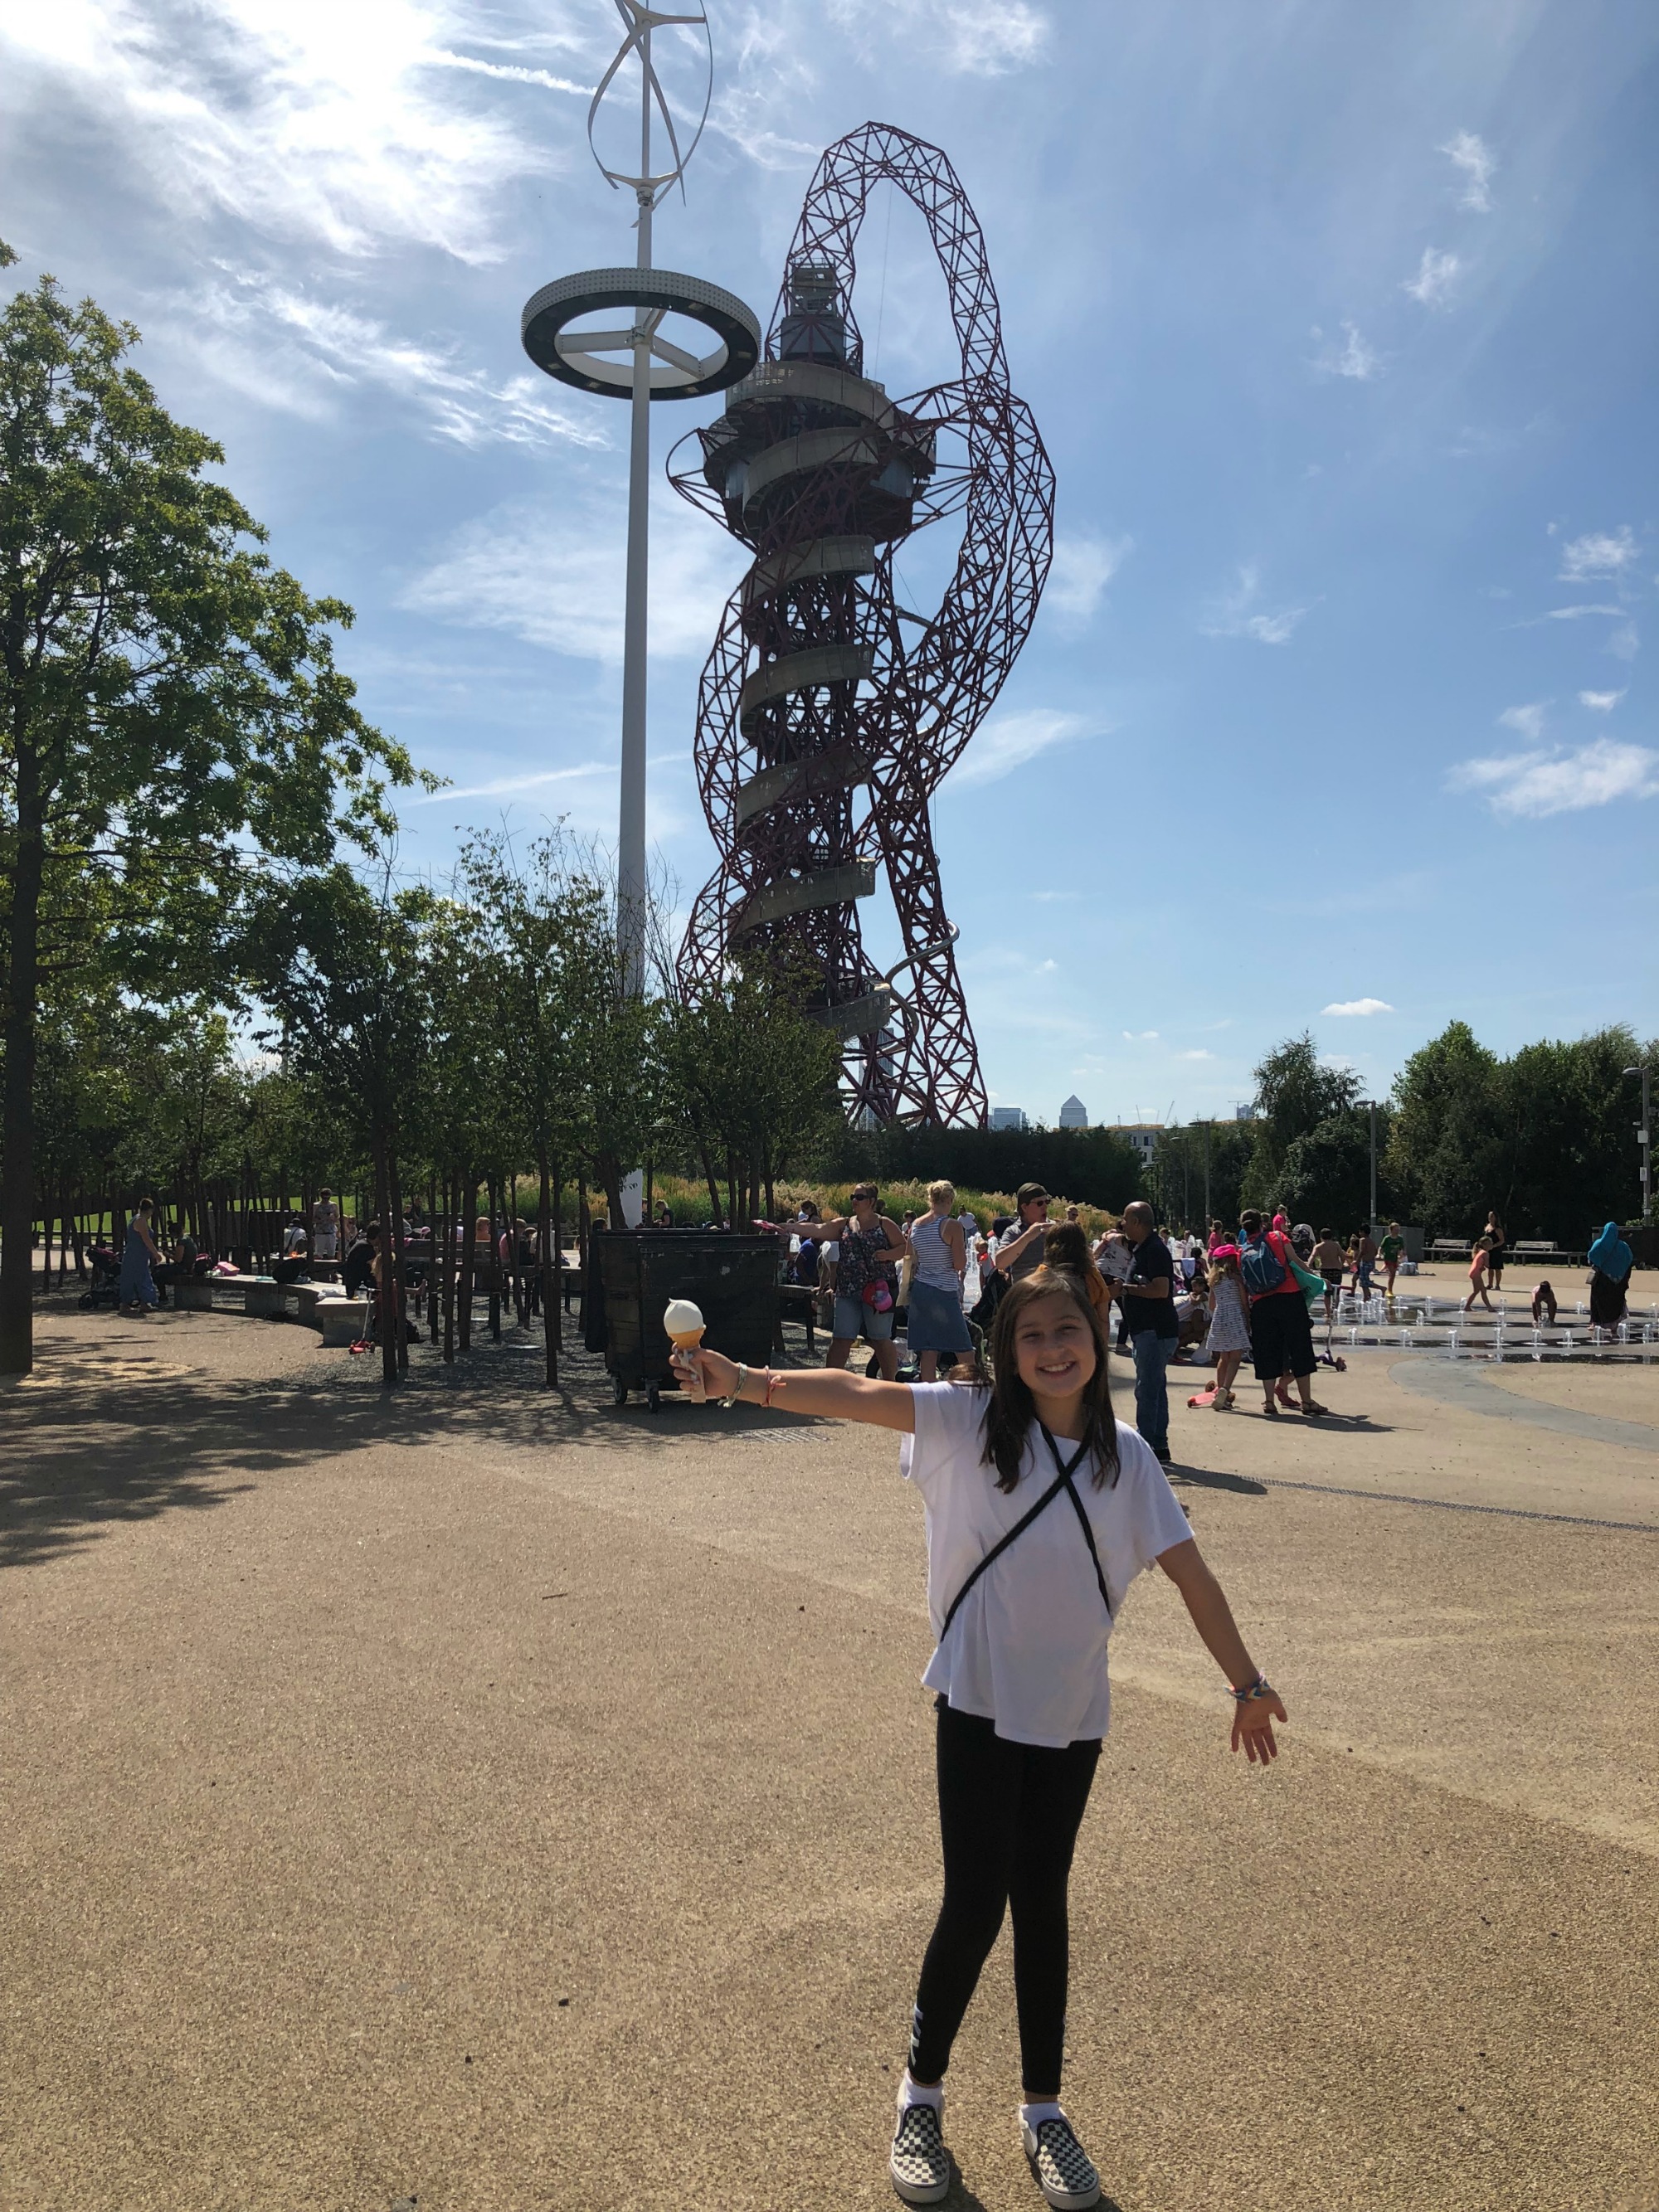 What to do with teens in London: The arcelormittalorbit slide